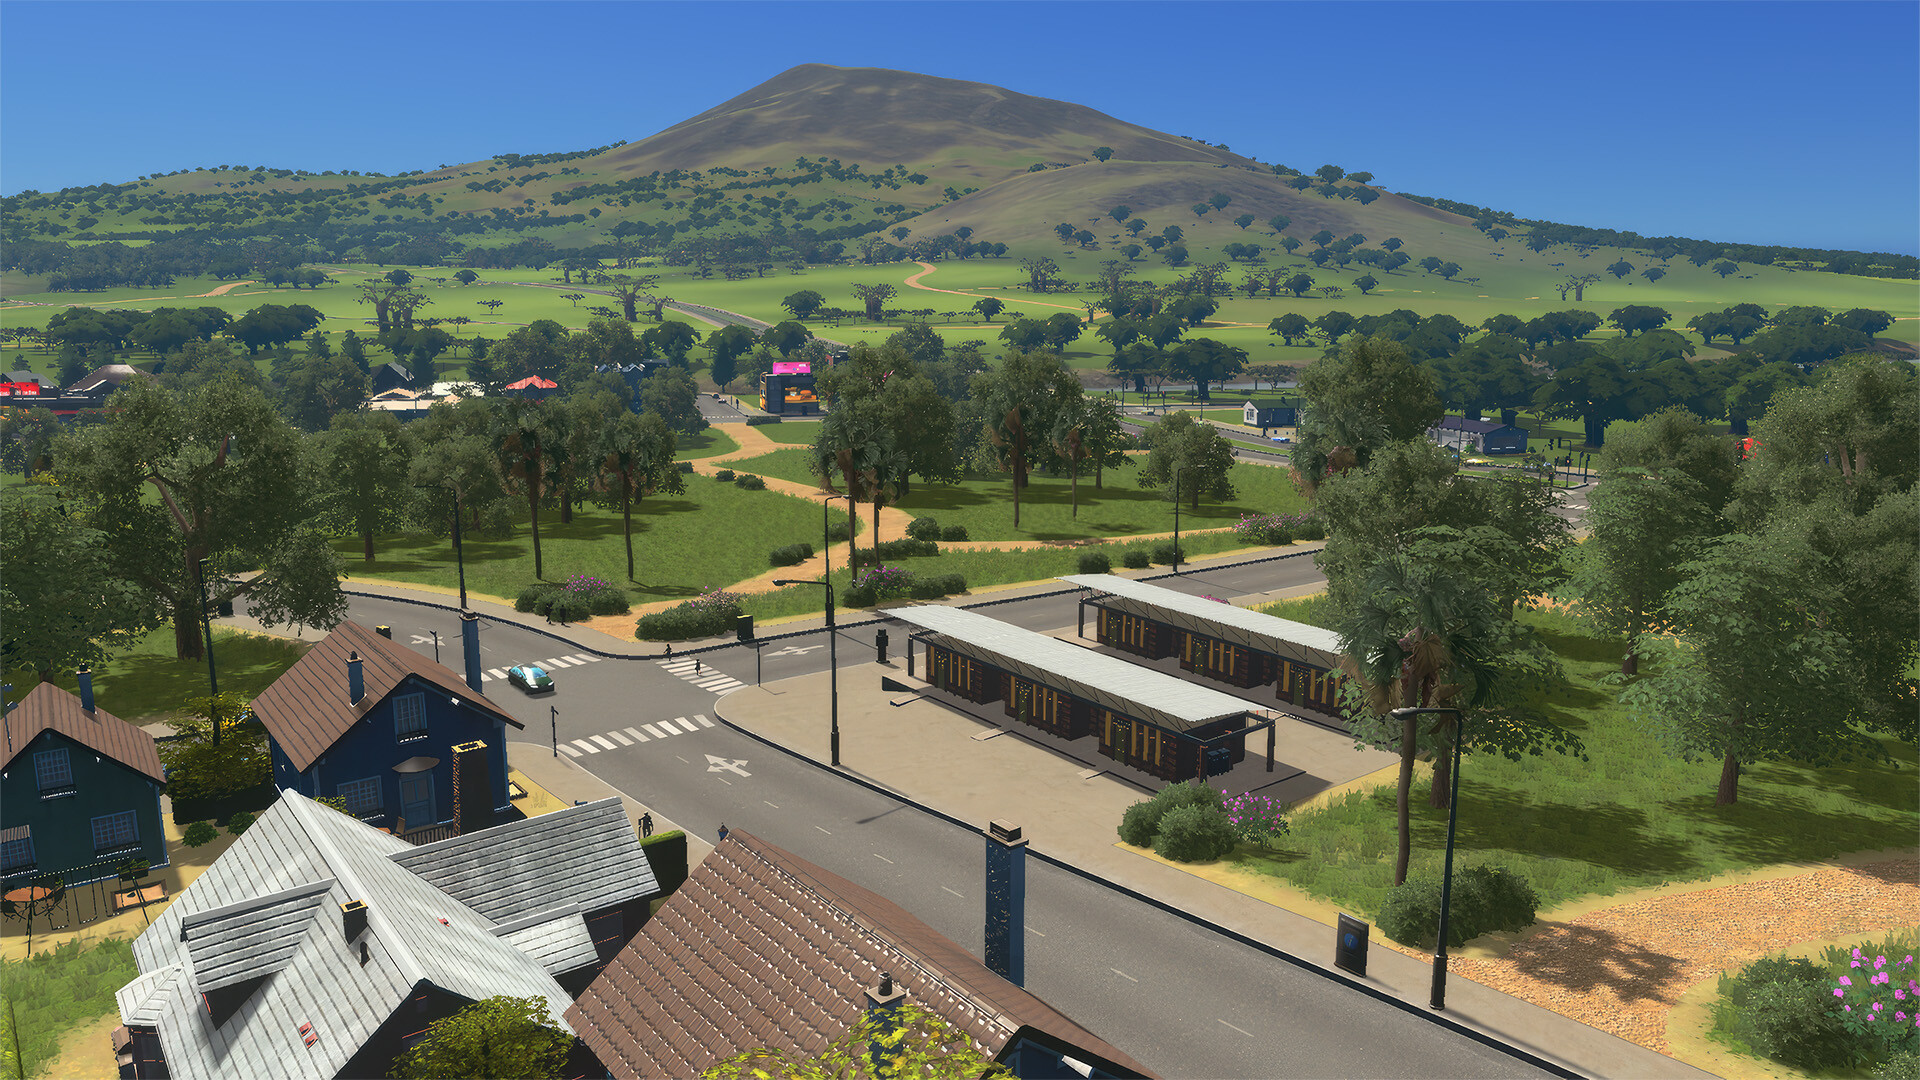 Cities: Skylines - Content Creator Pack: Africa in Miniature on Steam